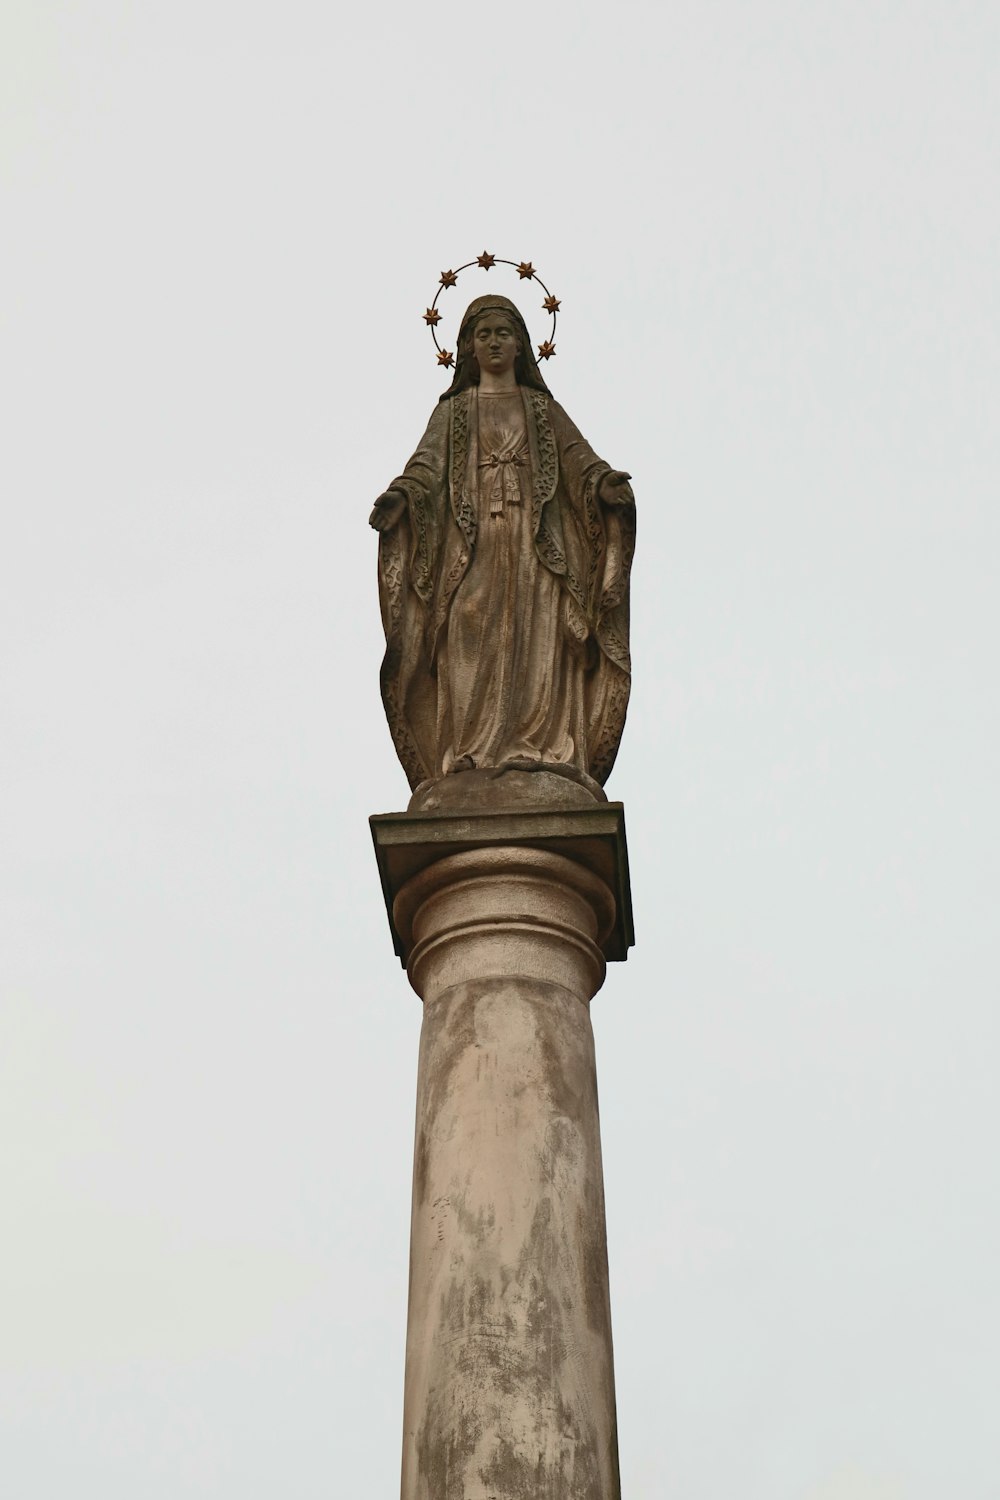 a statue of the virgin mary on top of a pillar